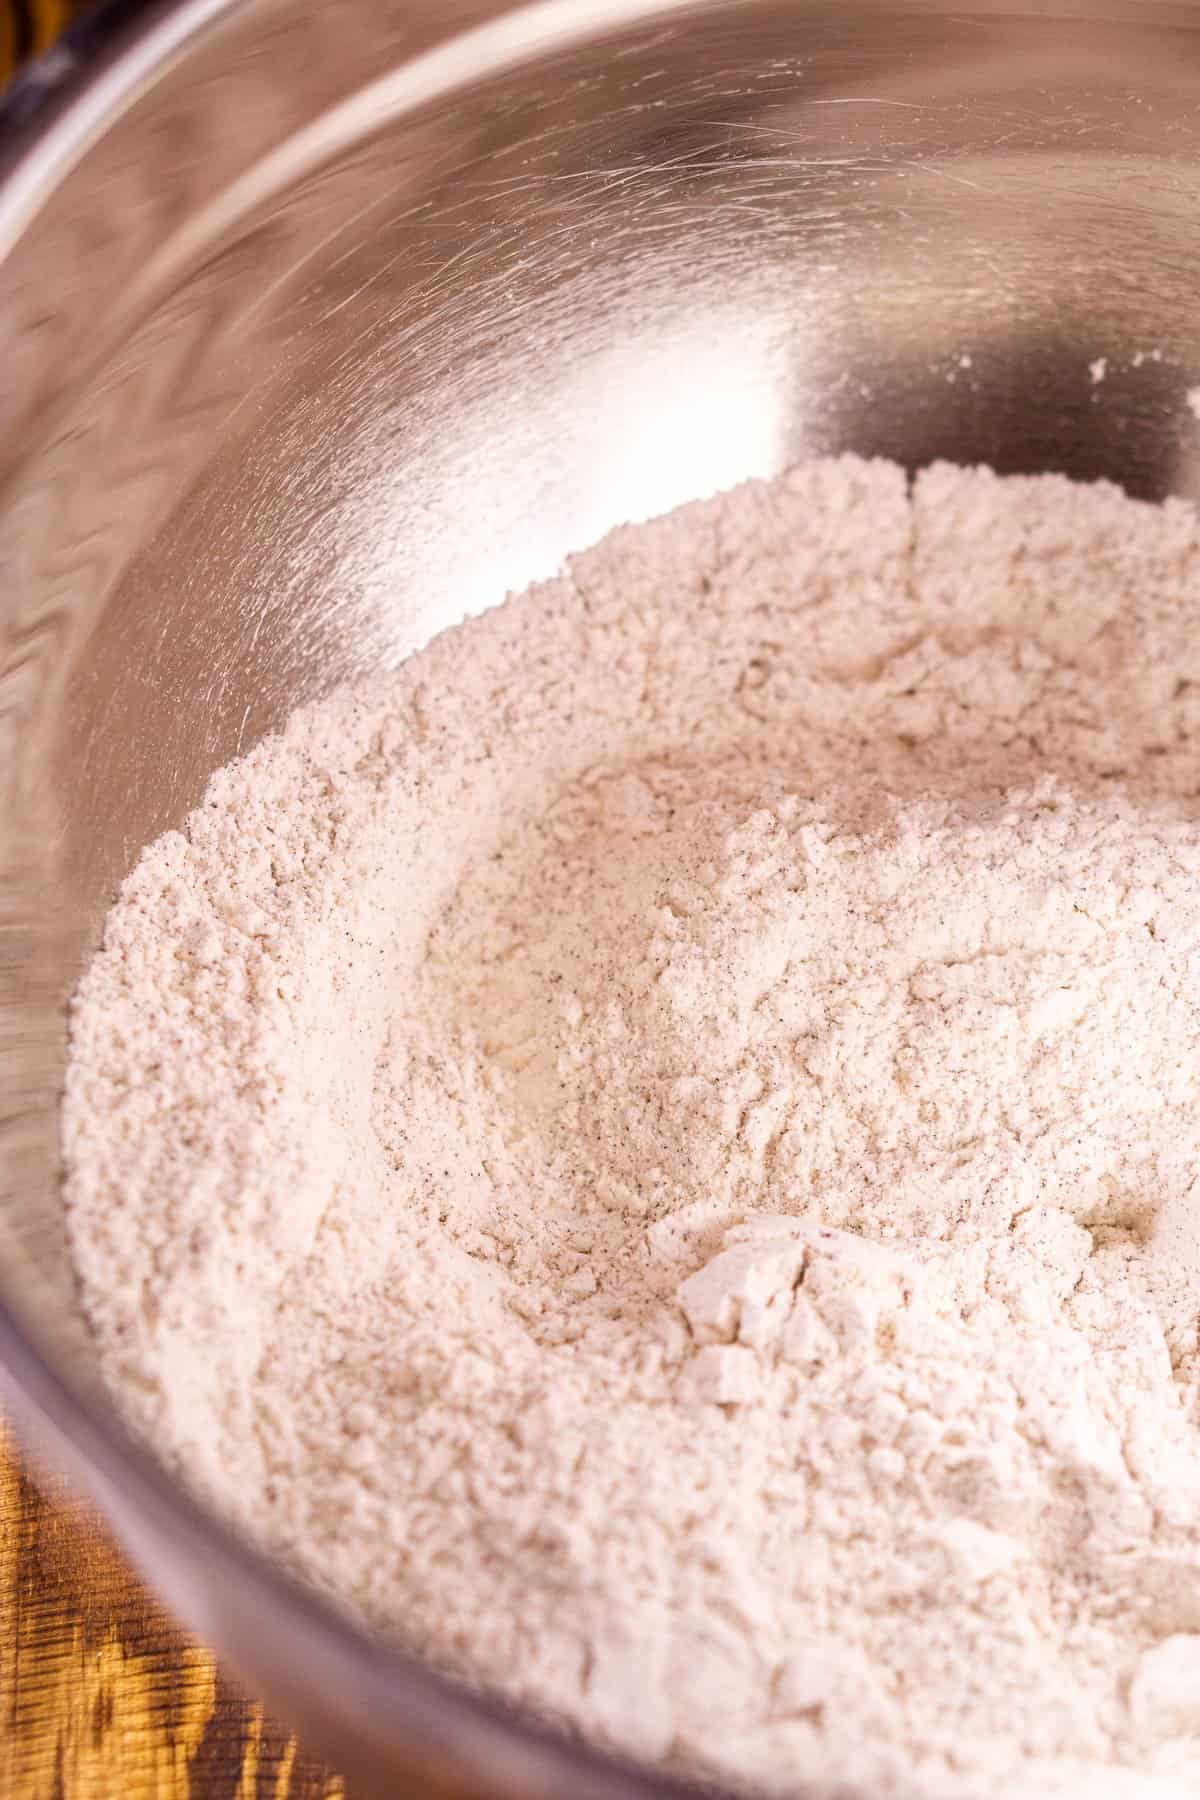 A mixing bowl with the flour, baking soda, salt and espresso powder after they have all been combined.